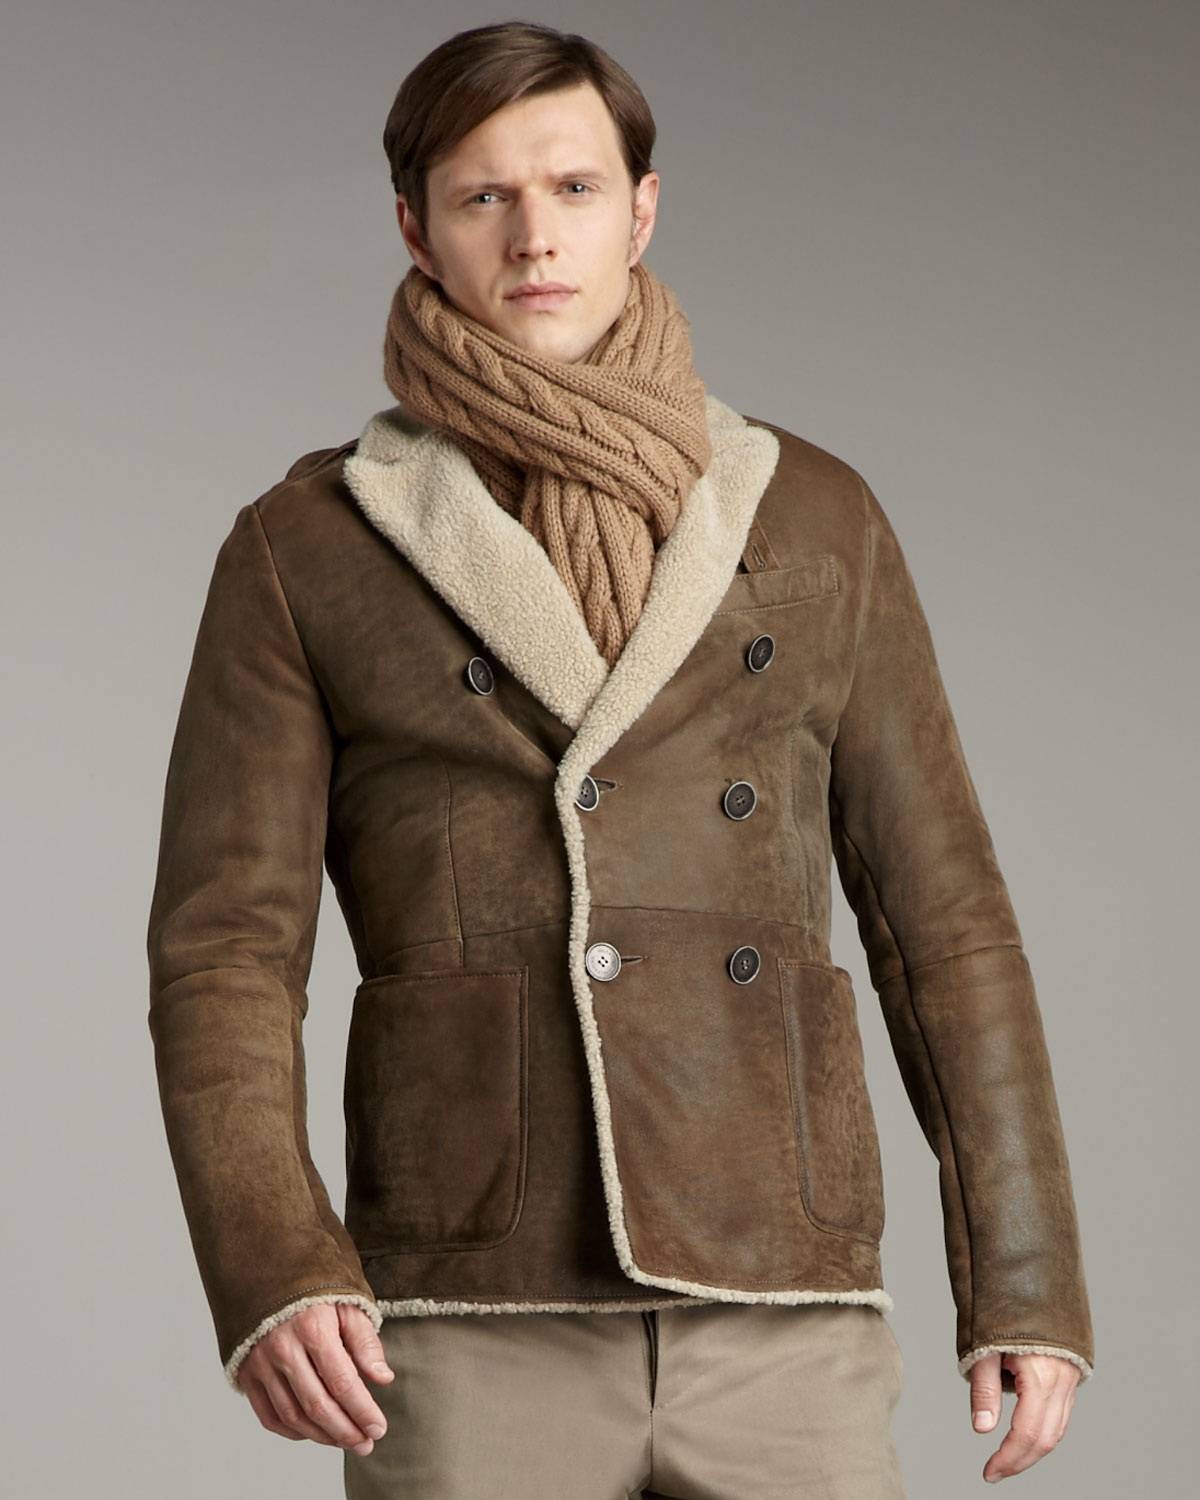 Lyst - Valentino Shearling Jacket in Brown for Men